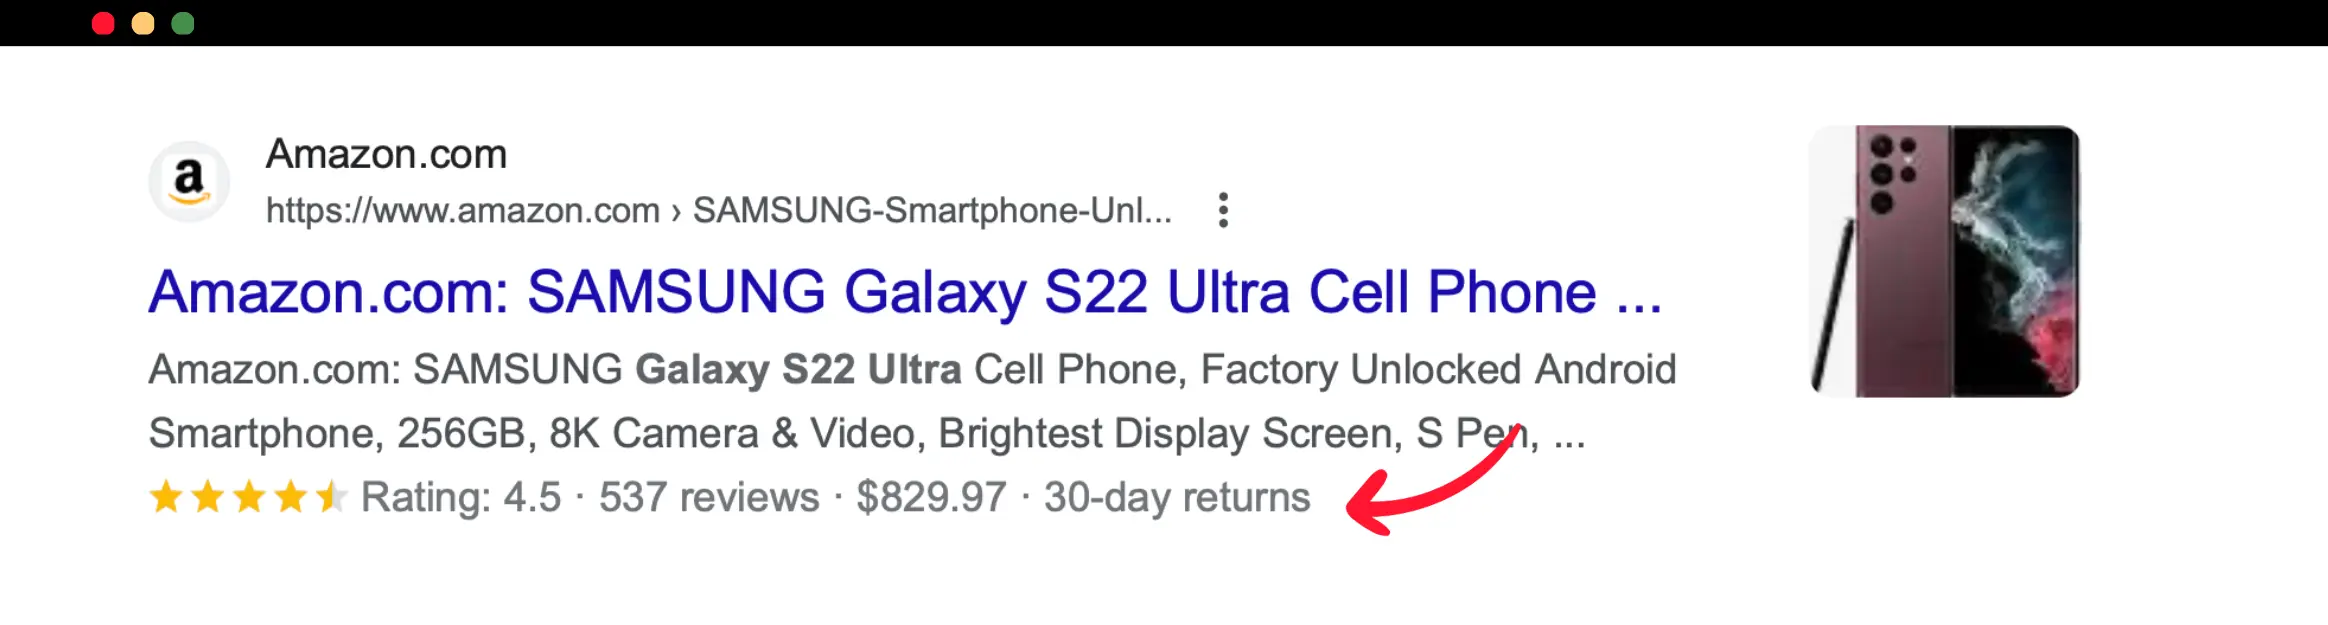 Example of Product Markup In SERPs.